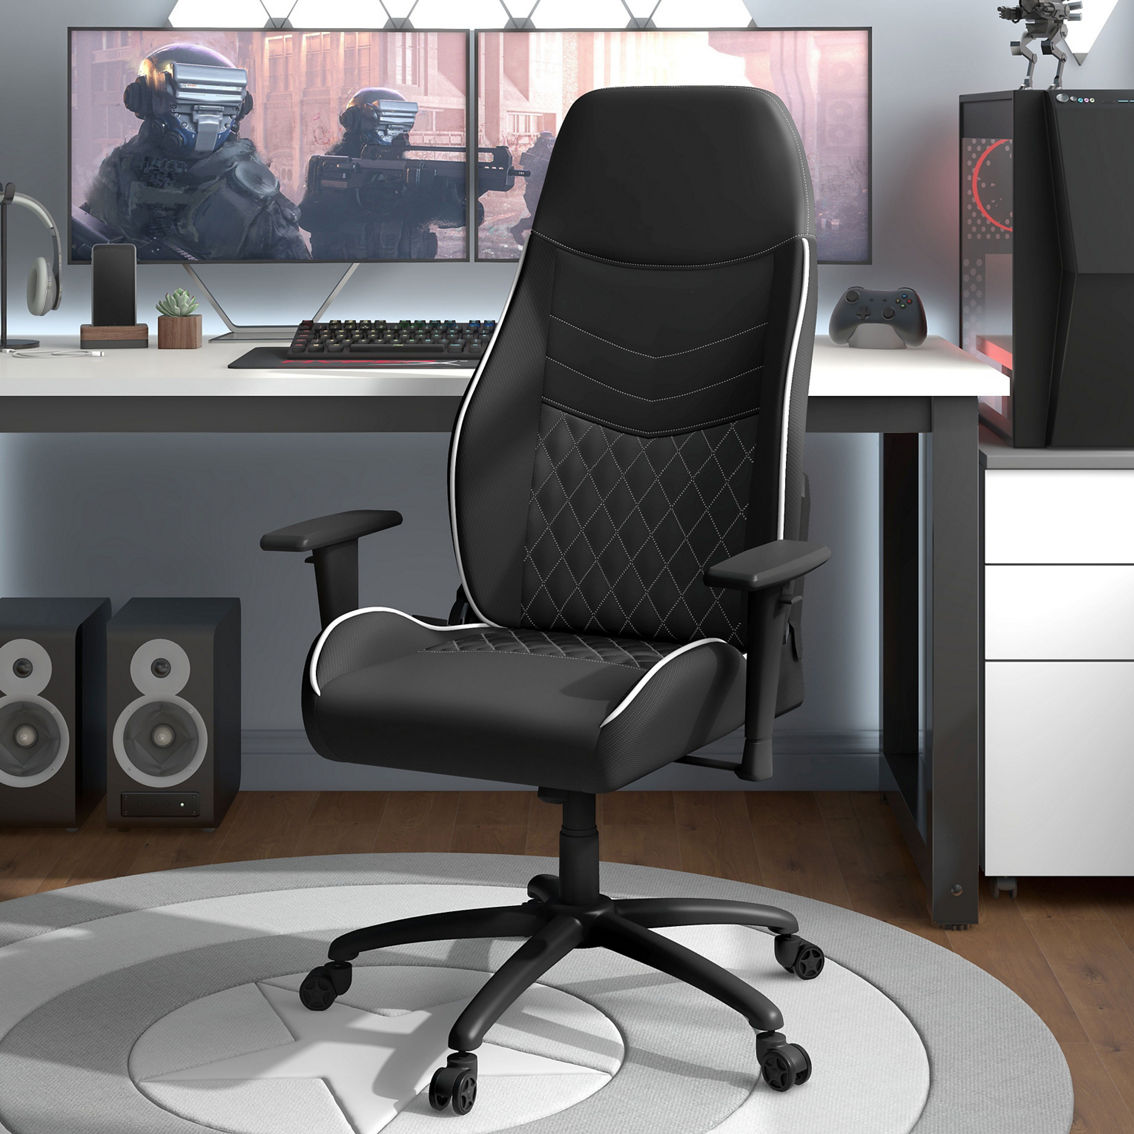 Furniture of America Aguil White Trim Adjustable Gaming Chair - Image 1 of 3